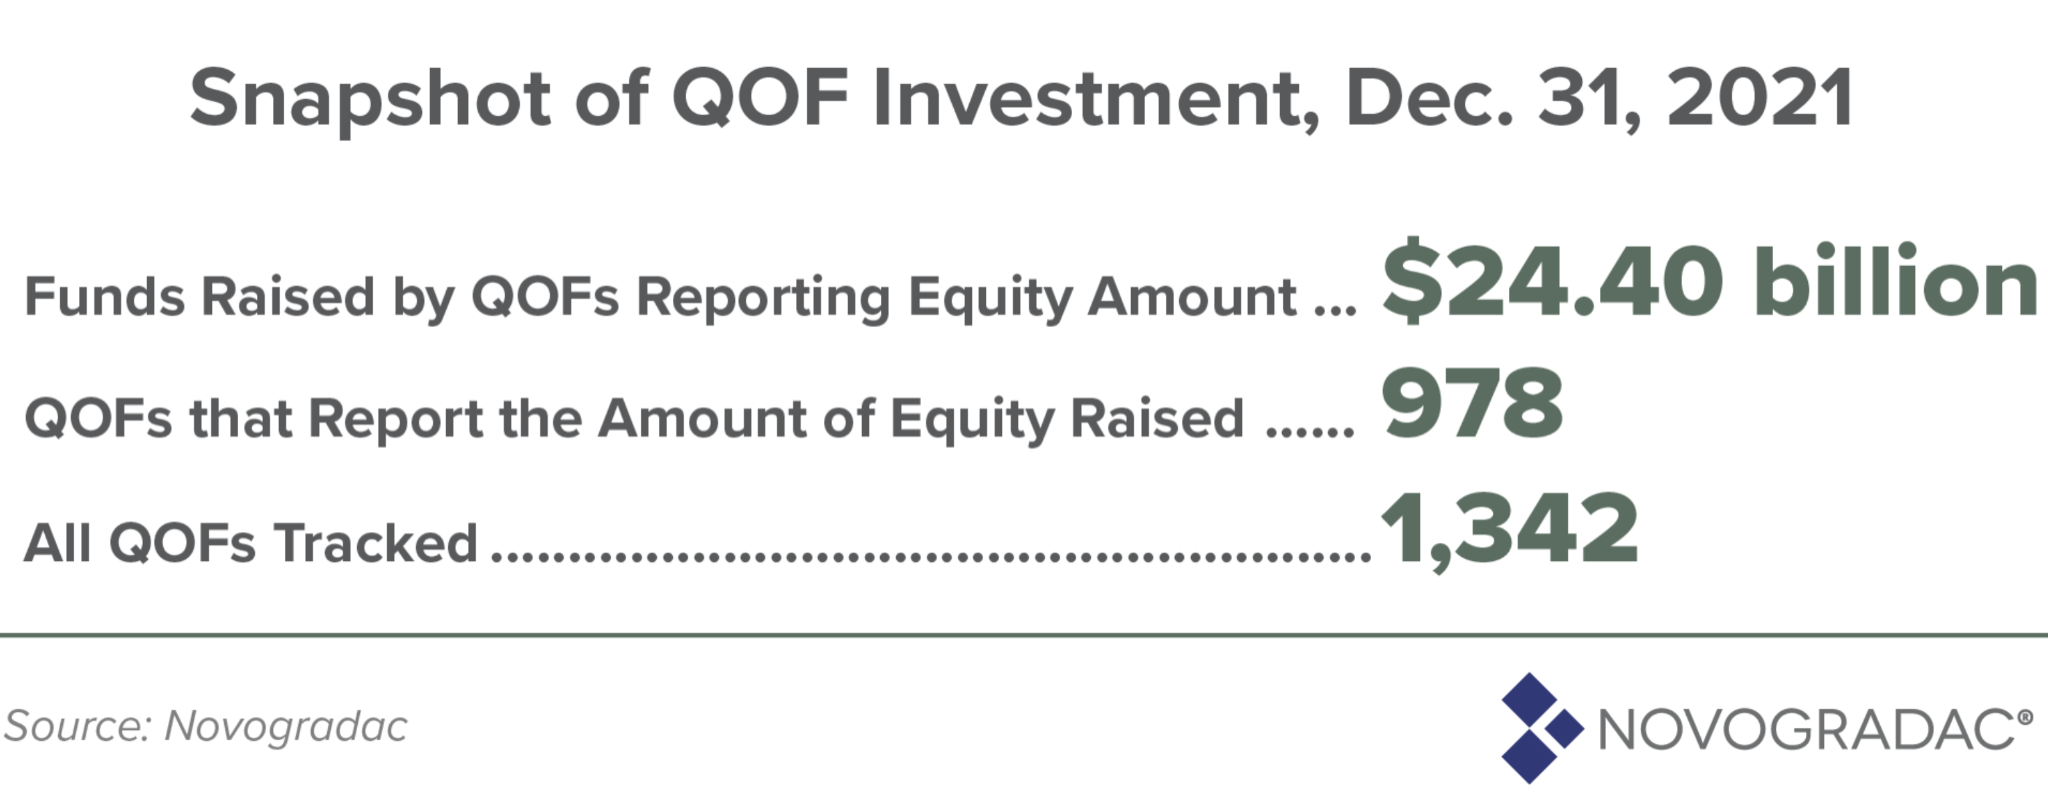 Image of Snapshot of QOF Investment from December 31, 2021 reporting funds raised by QOFs Reporting Equity Amount of $24.40 billion. QOFs that report the amount of Equity Raised as 978. All QOFs Tracked are 1,342. Source: Novogradac